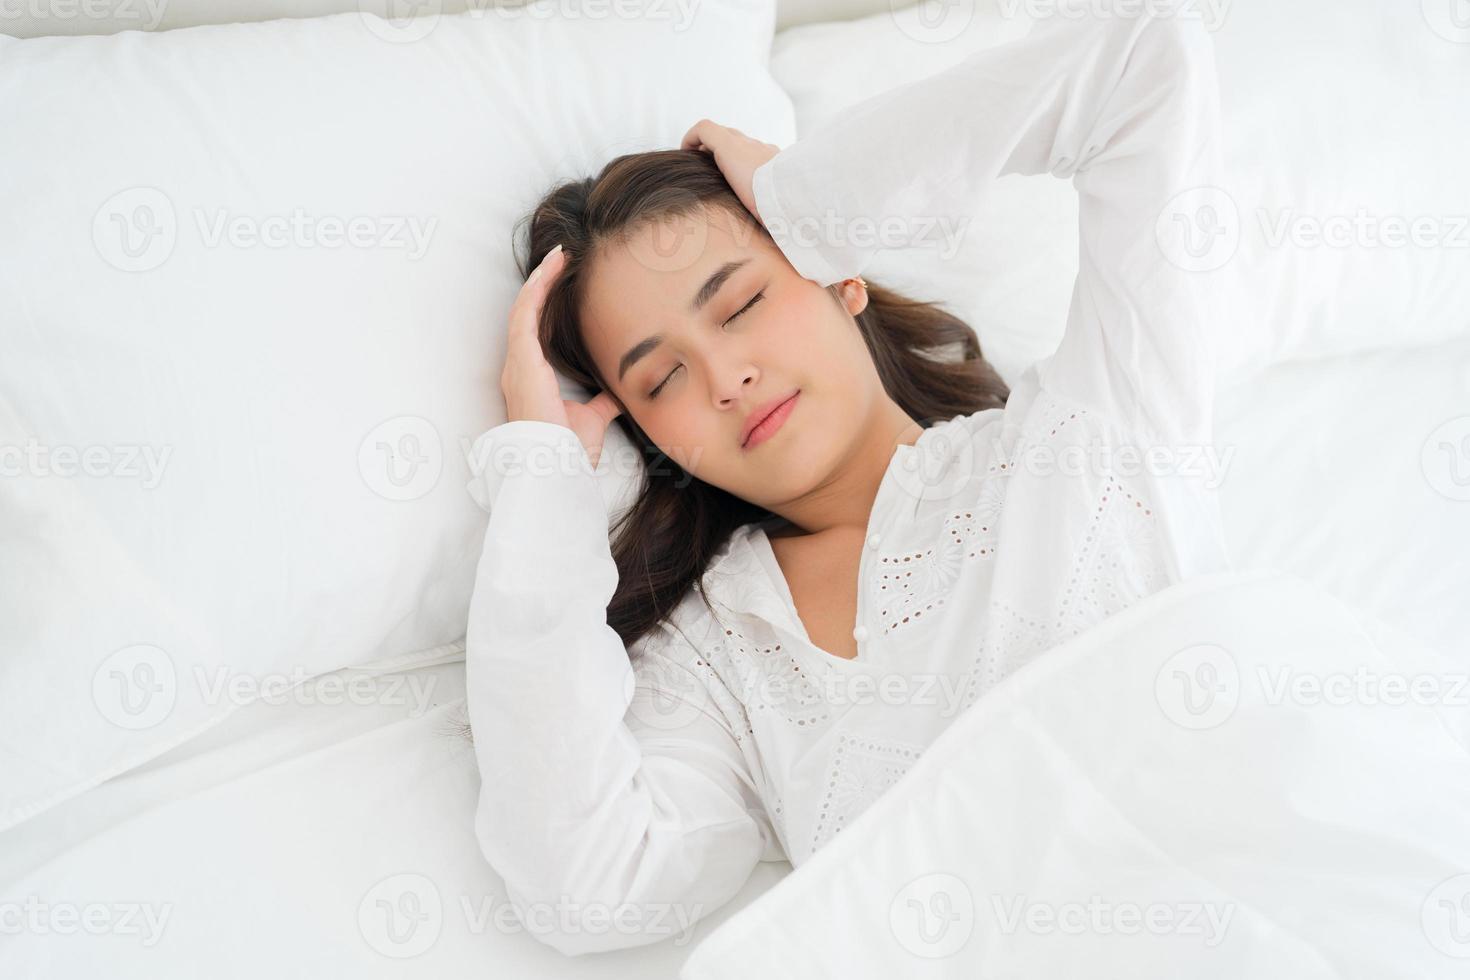 Girl lying in bed unwell suffers from insomnia headacheAnxiety, holding your head photo